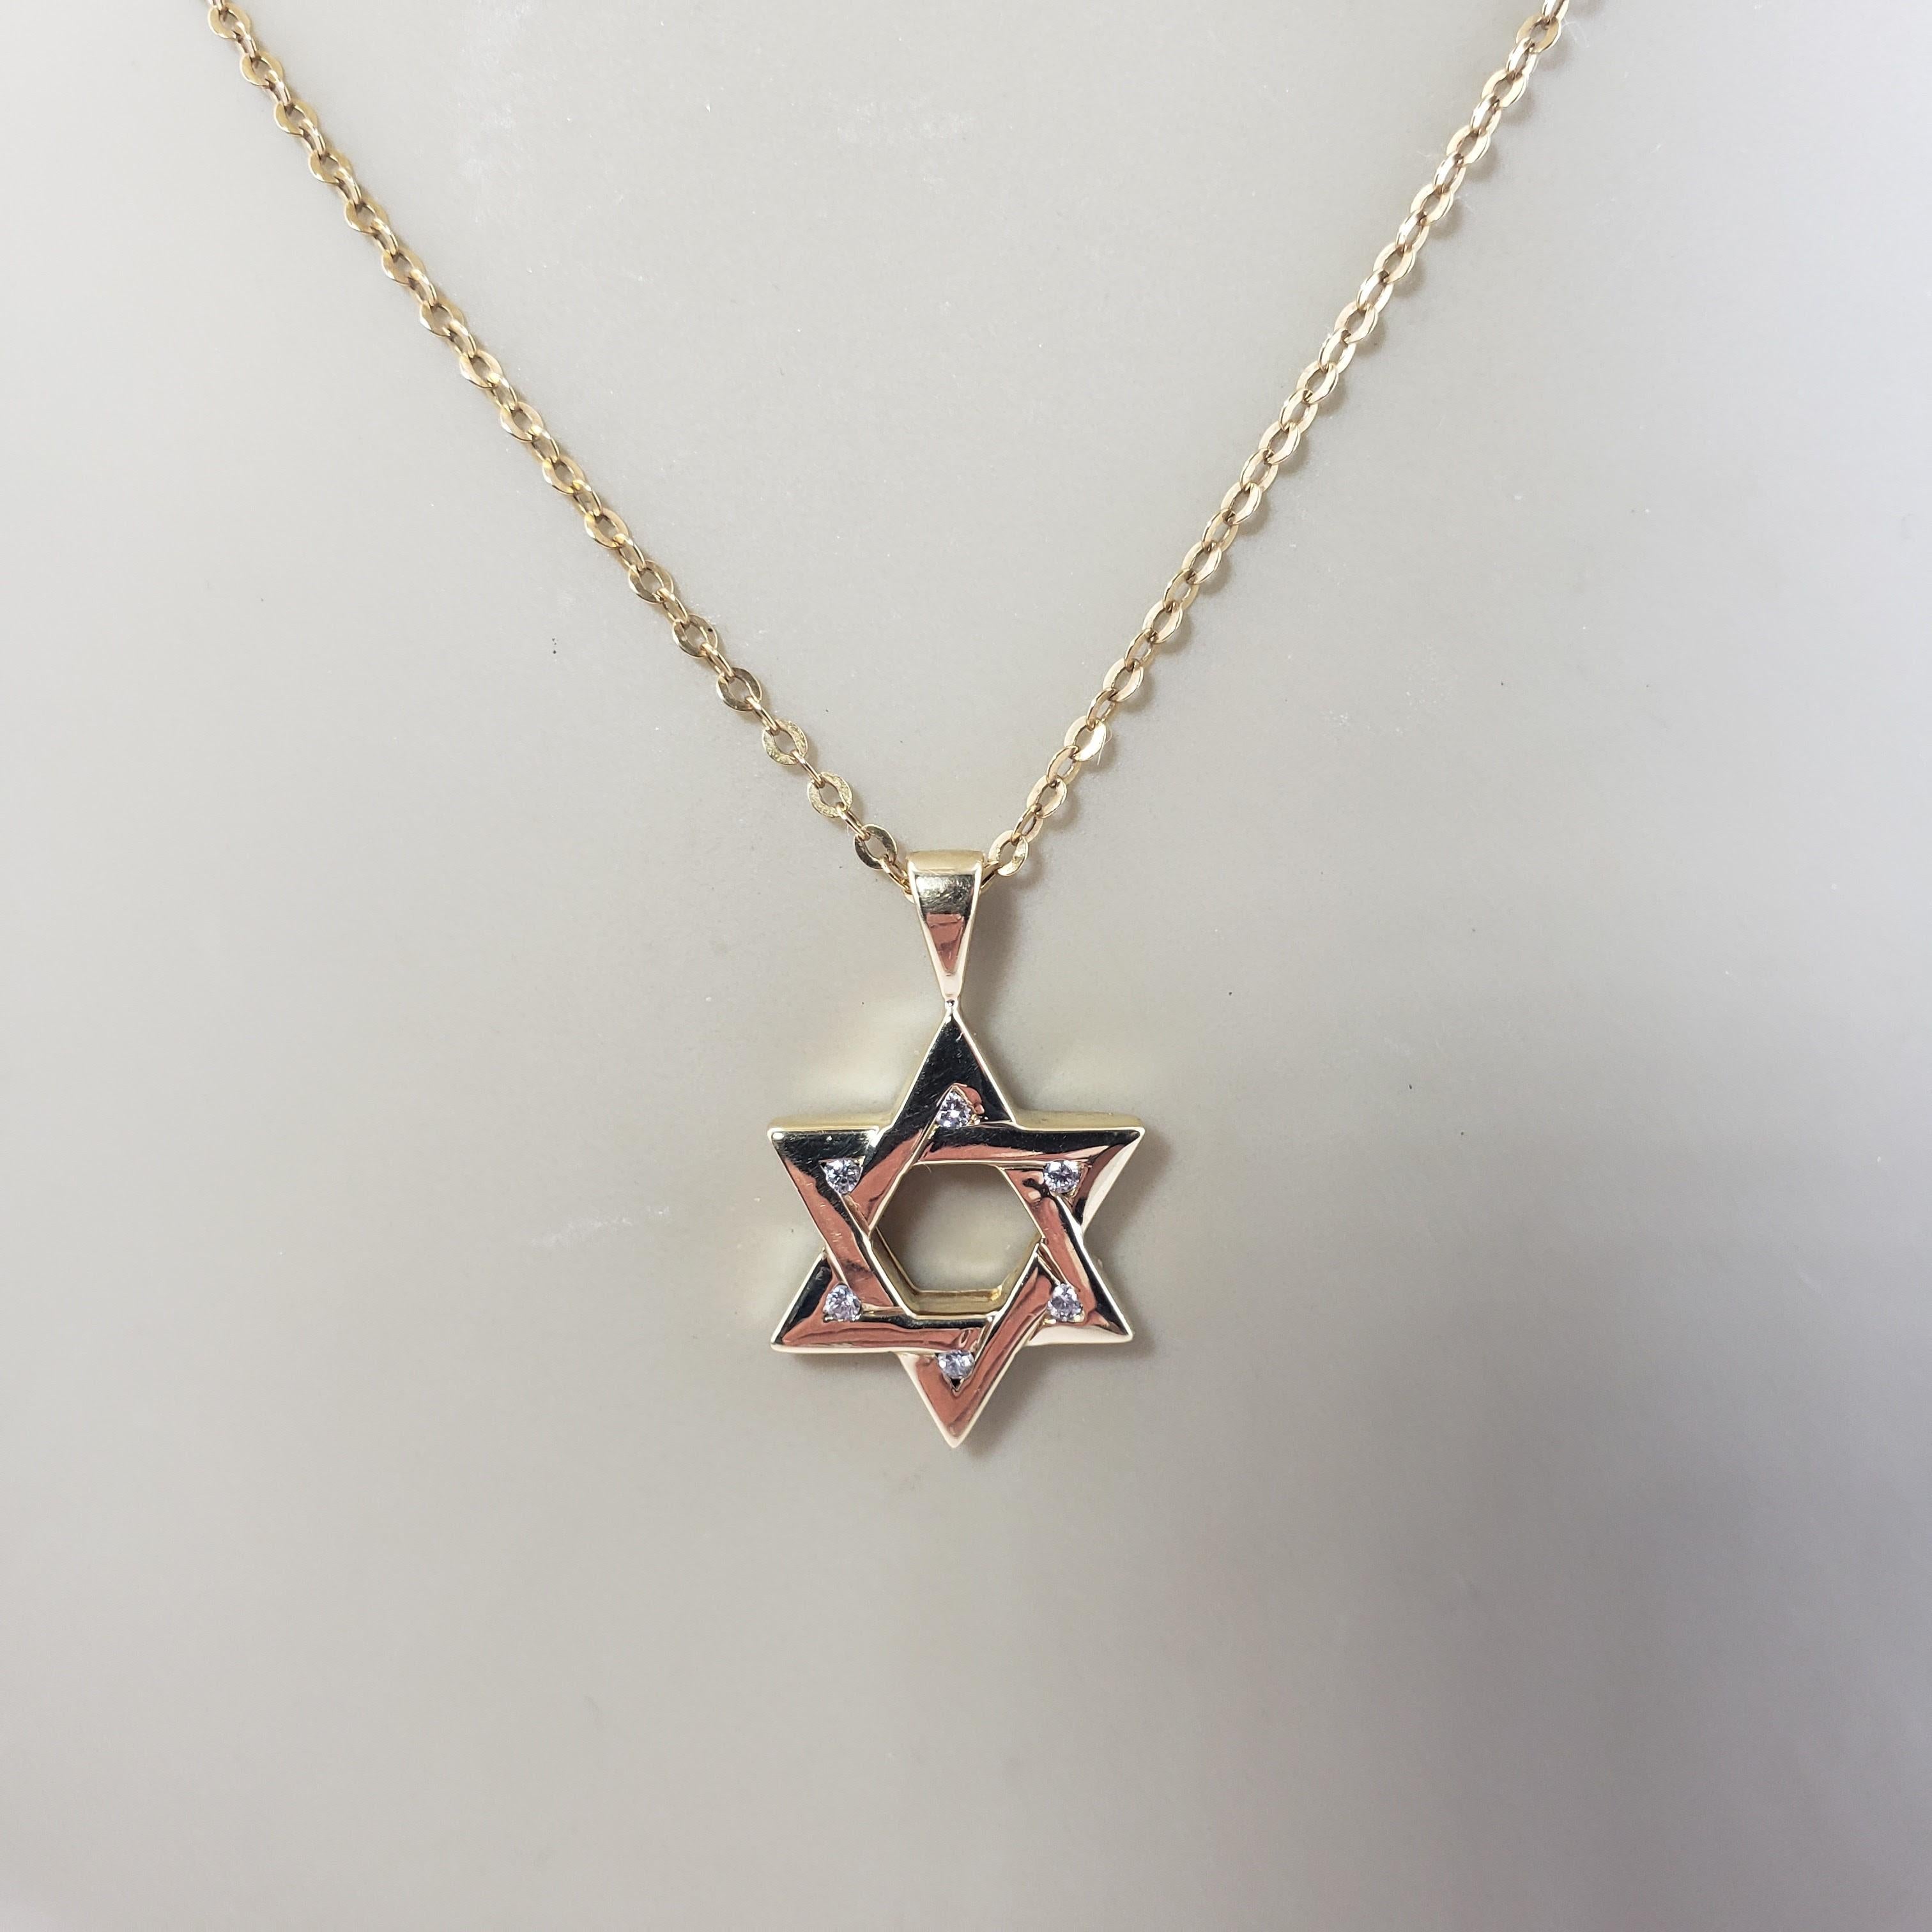 Vintage 18 Karat Yellow Gold and Diamond Star of David Pendant-

This lovely Star of David pendant features six round brilliant cut diamonds set in beautifully detailed 18K yellow gold.

Approximate total diamond weight: .06 ct.

Diamond clarity: